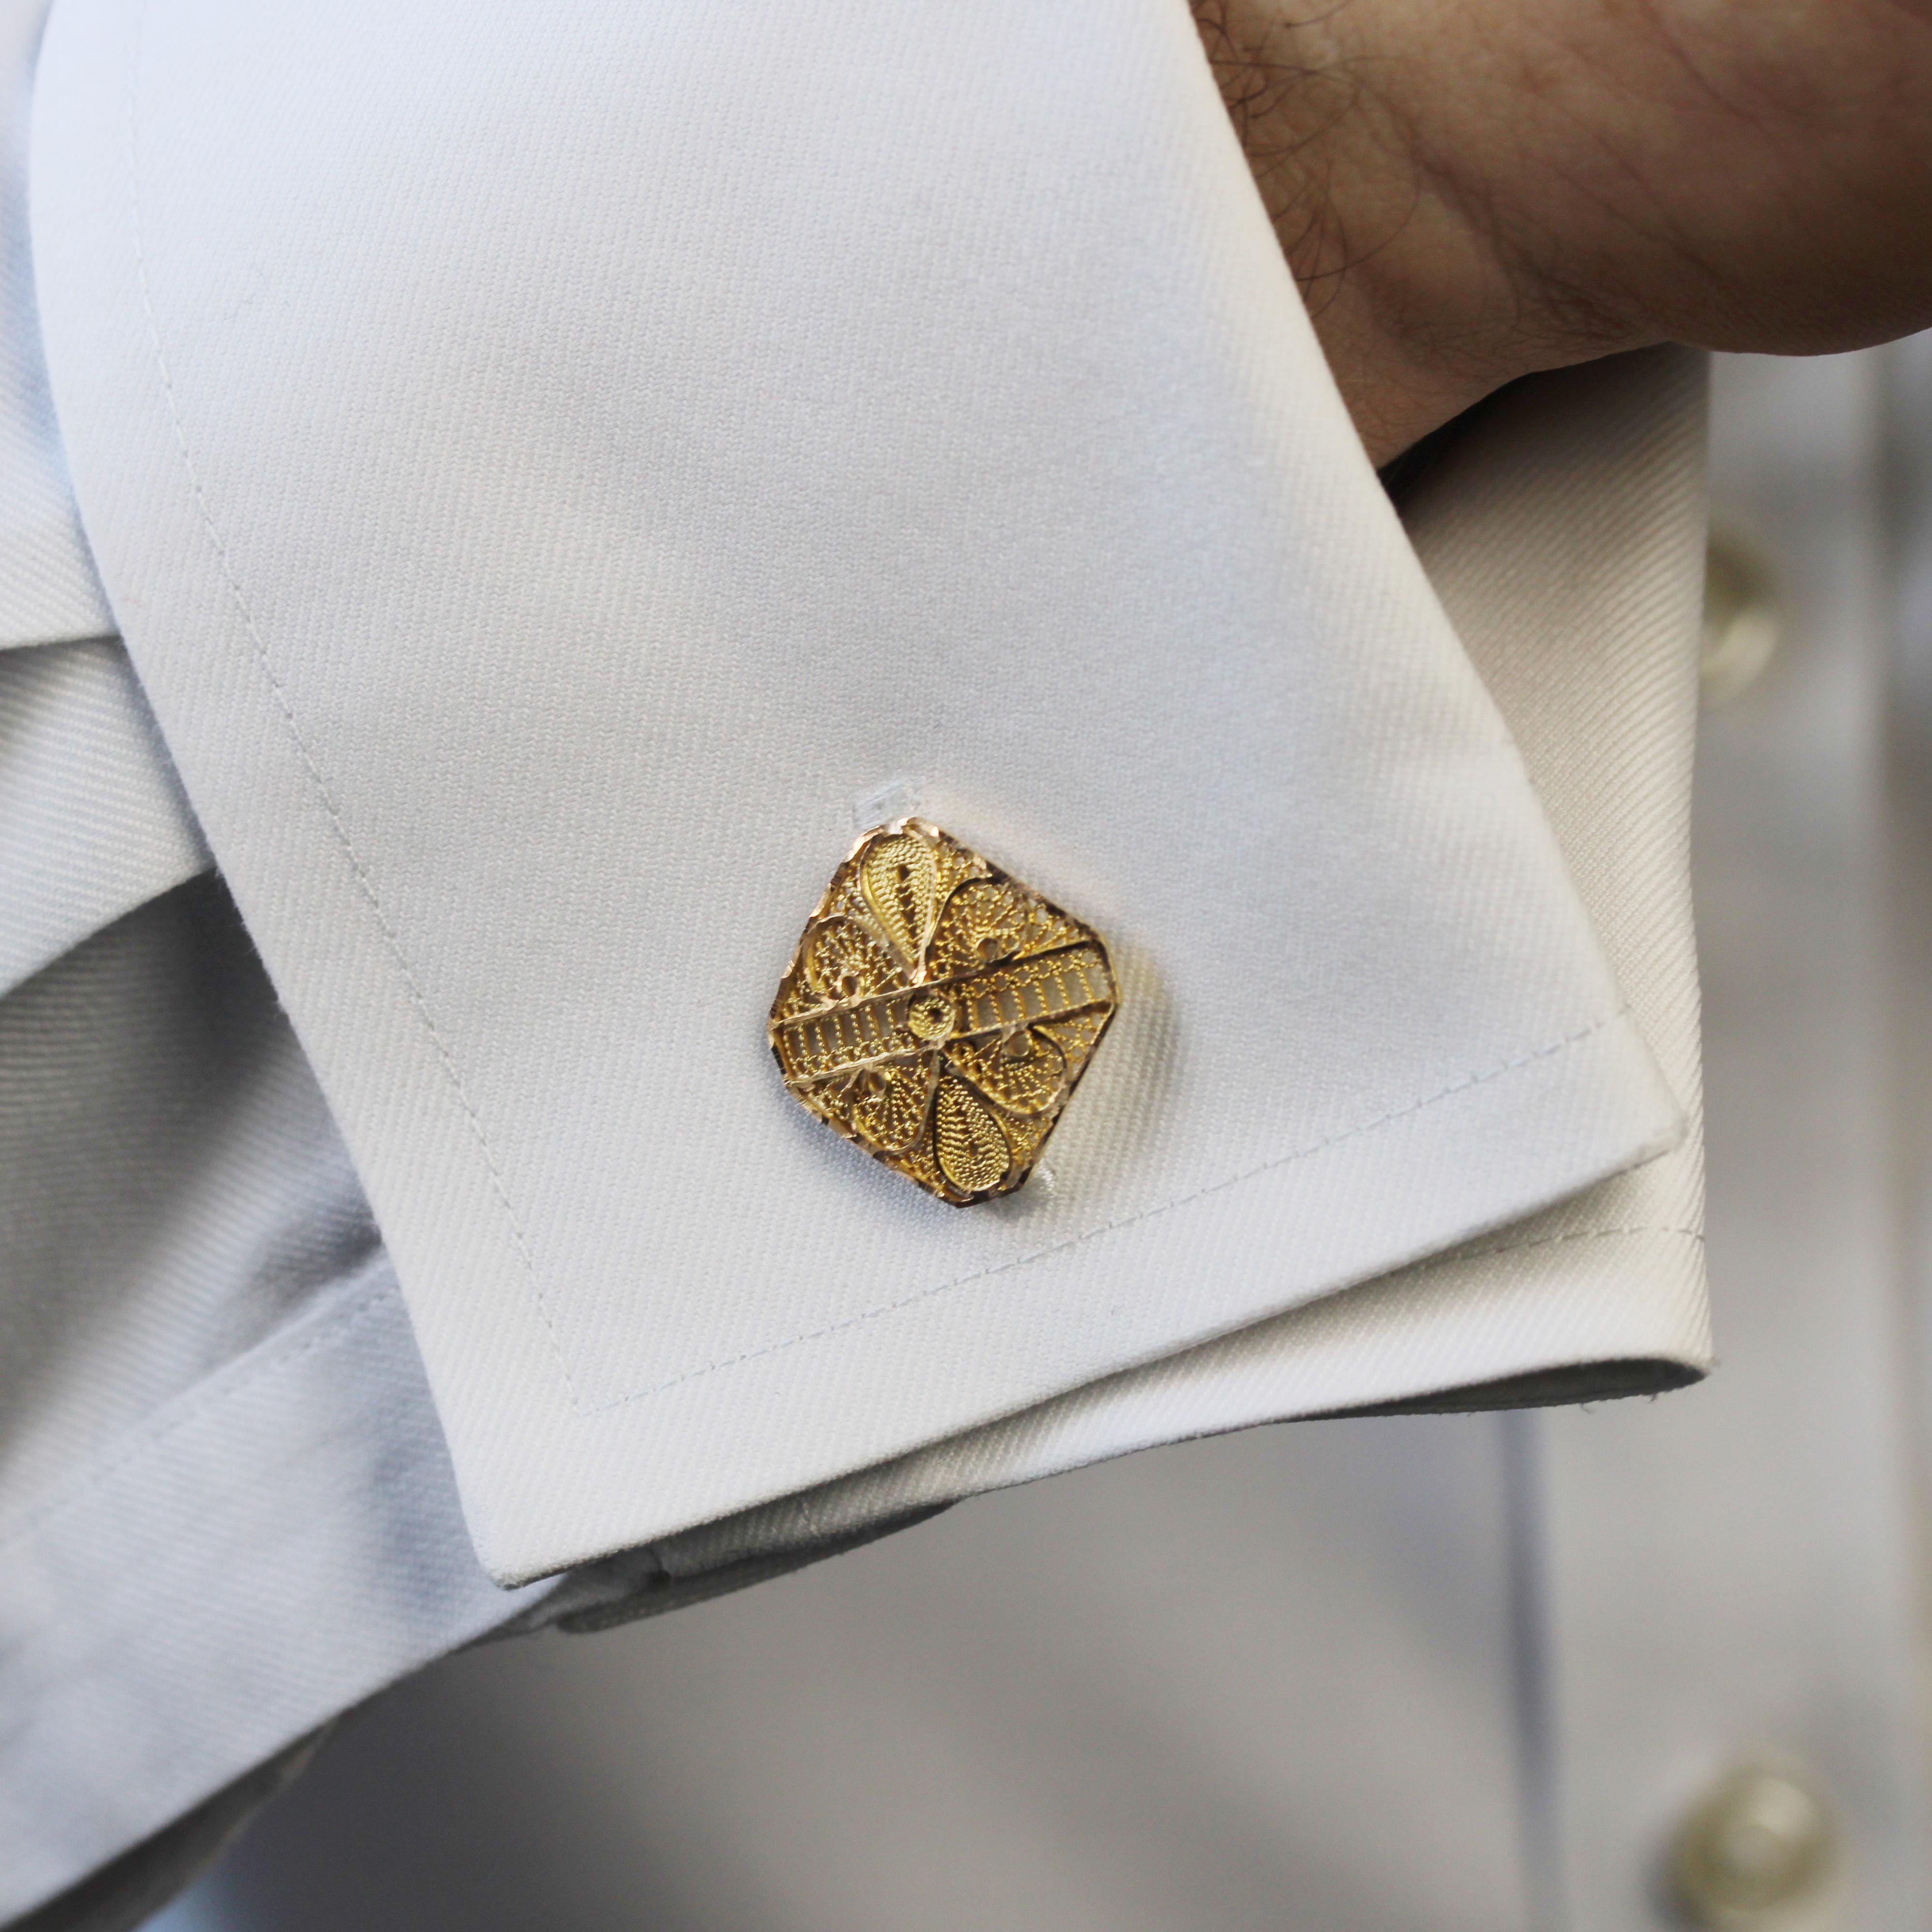 Cufflinks in 18 karat yellow gold.
Each gold cufflink is square, openwork filigree, held to its attachment in the form of shuttle of the same decoration, by small rings.
Height : 16.3 mm, width : 16.1 mm, thickness : 1.3 mm, height of the shuttle :